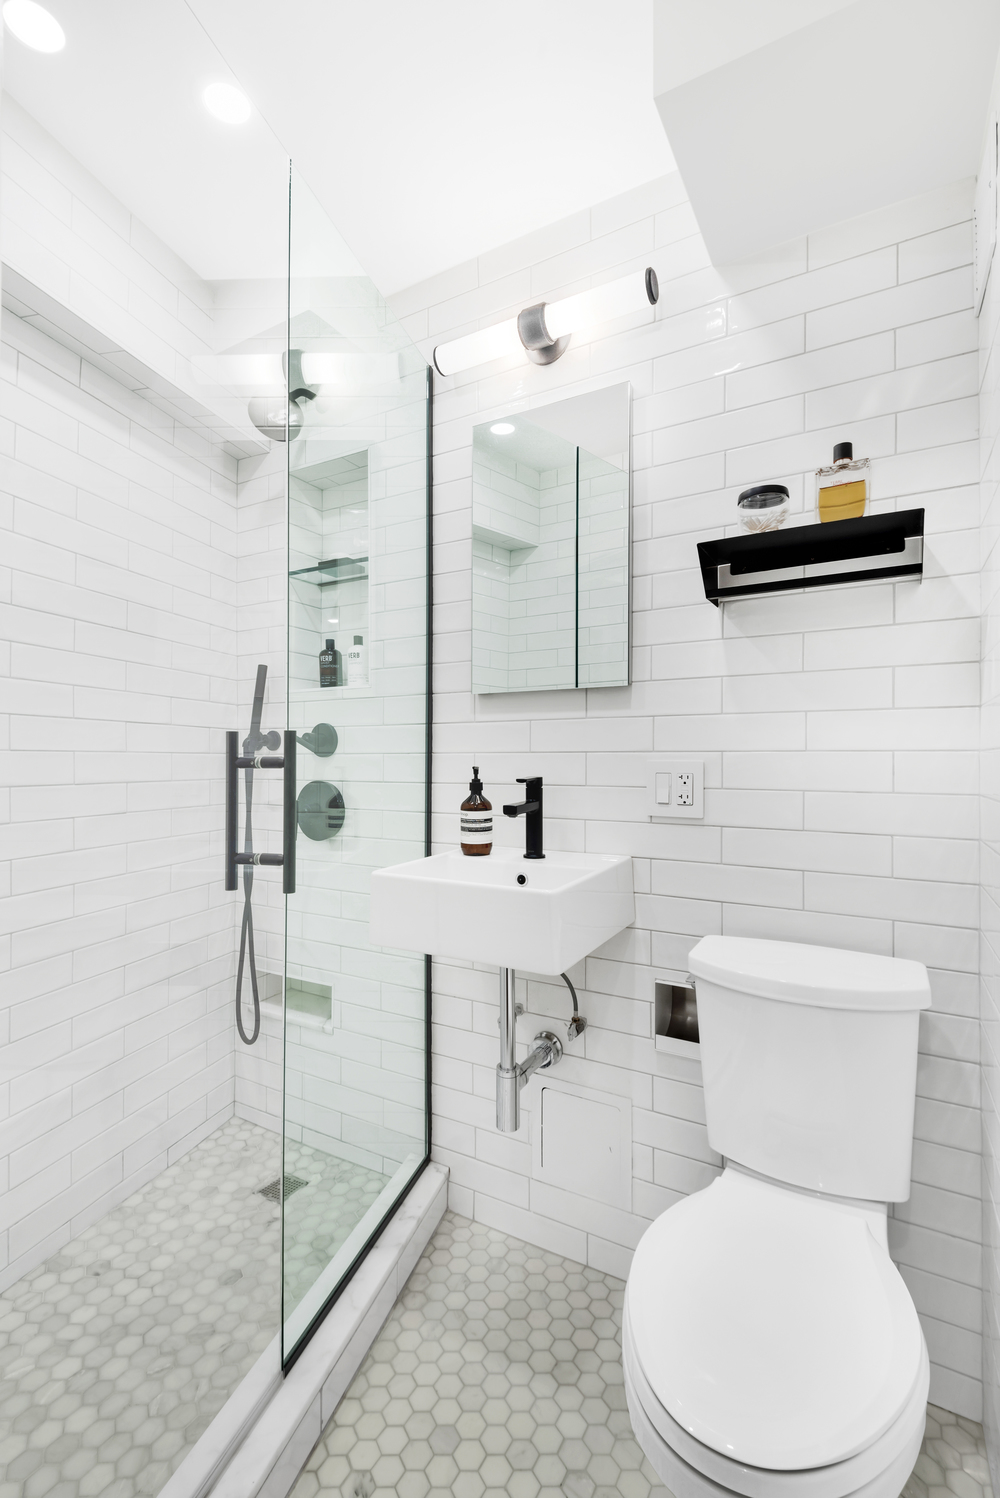 Bathroom remodel with glass shower doors and white subway tiled walls.